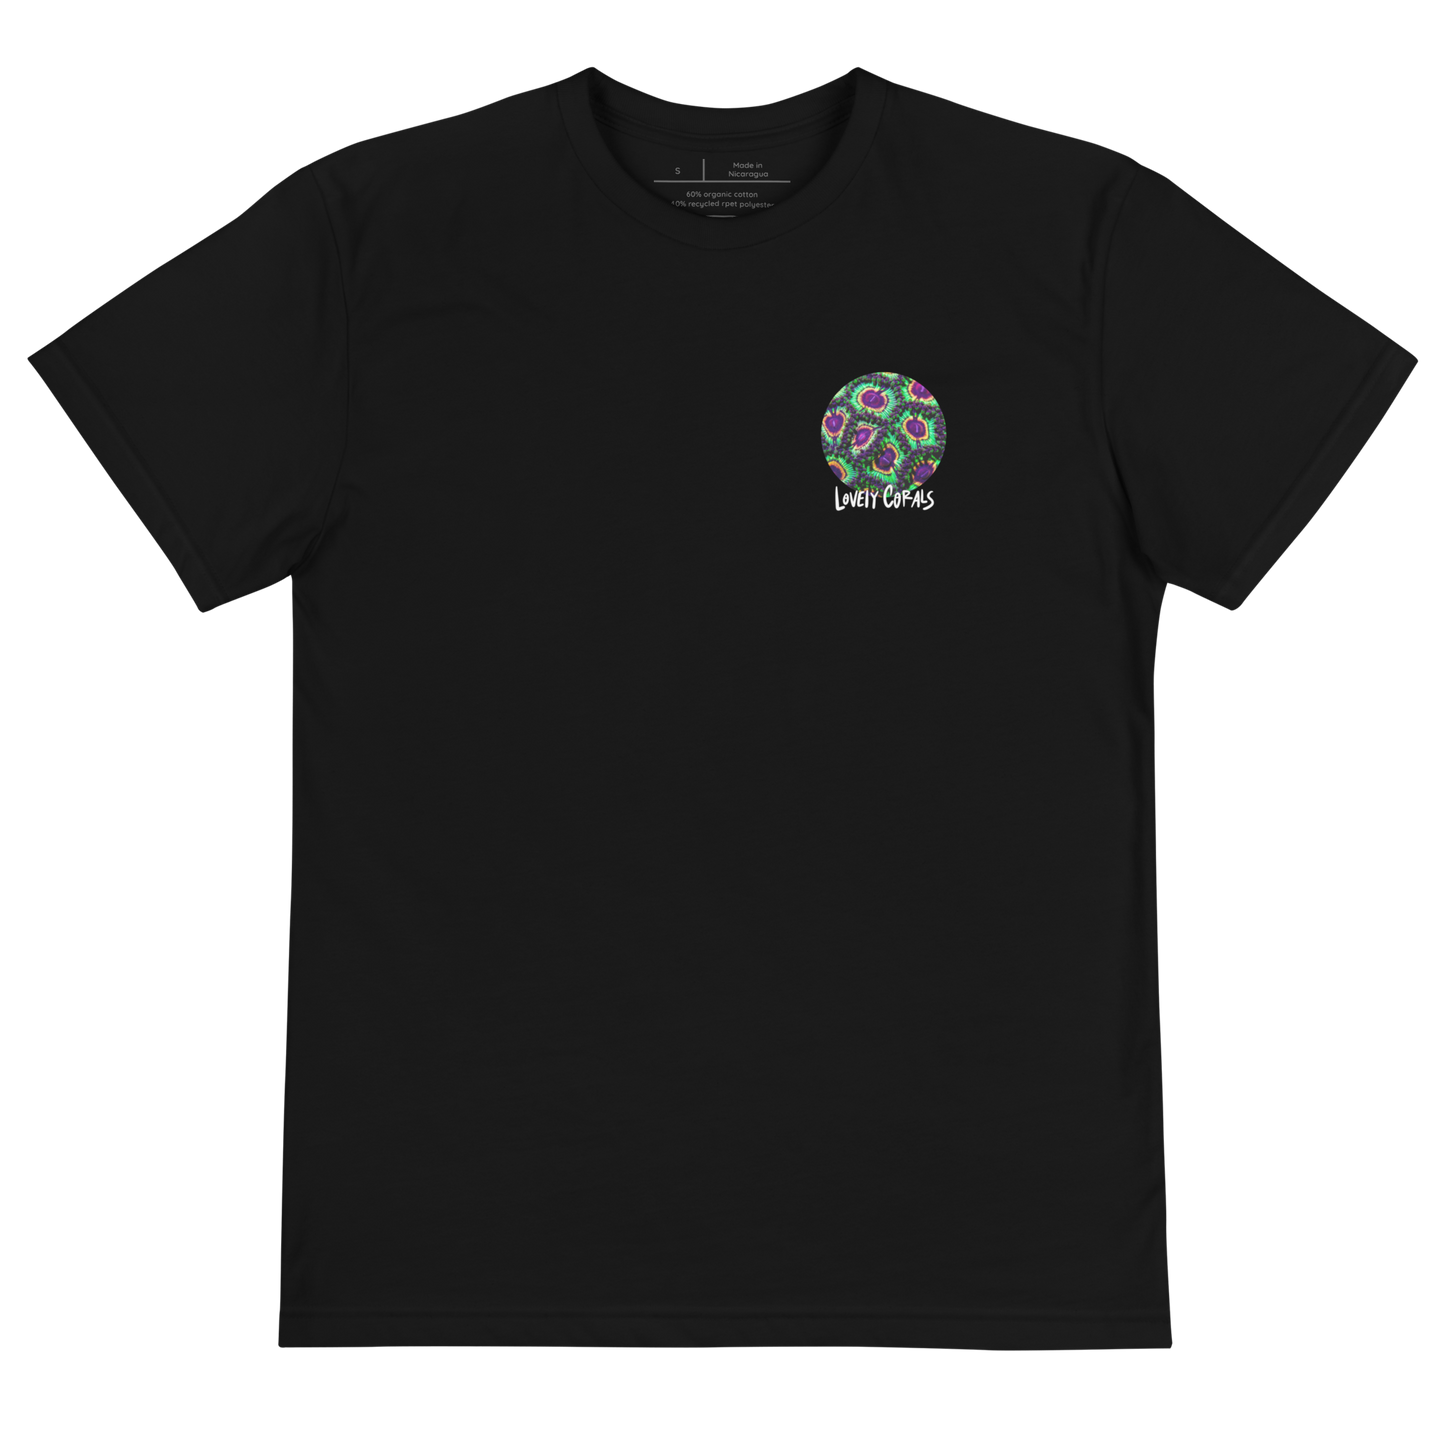 We See You – NFT Official T-shirt | LovelyCorals